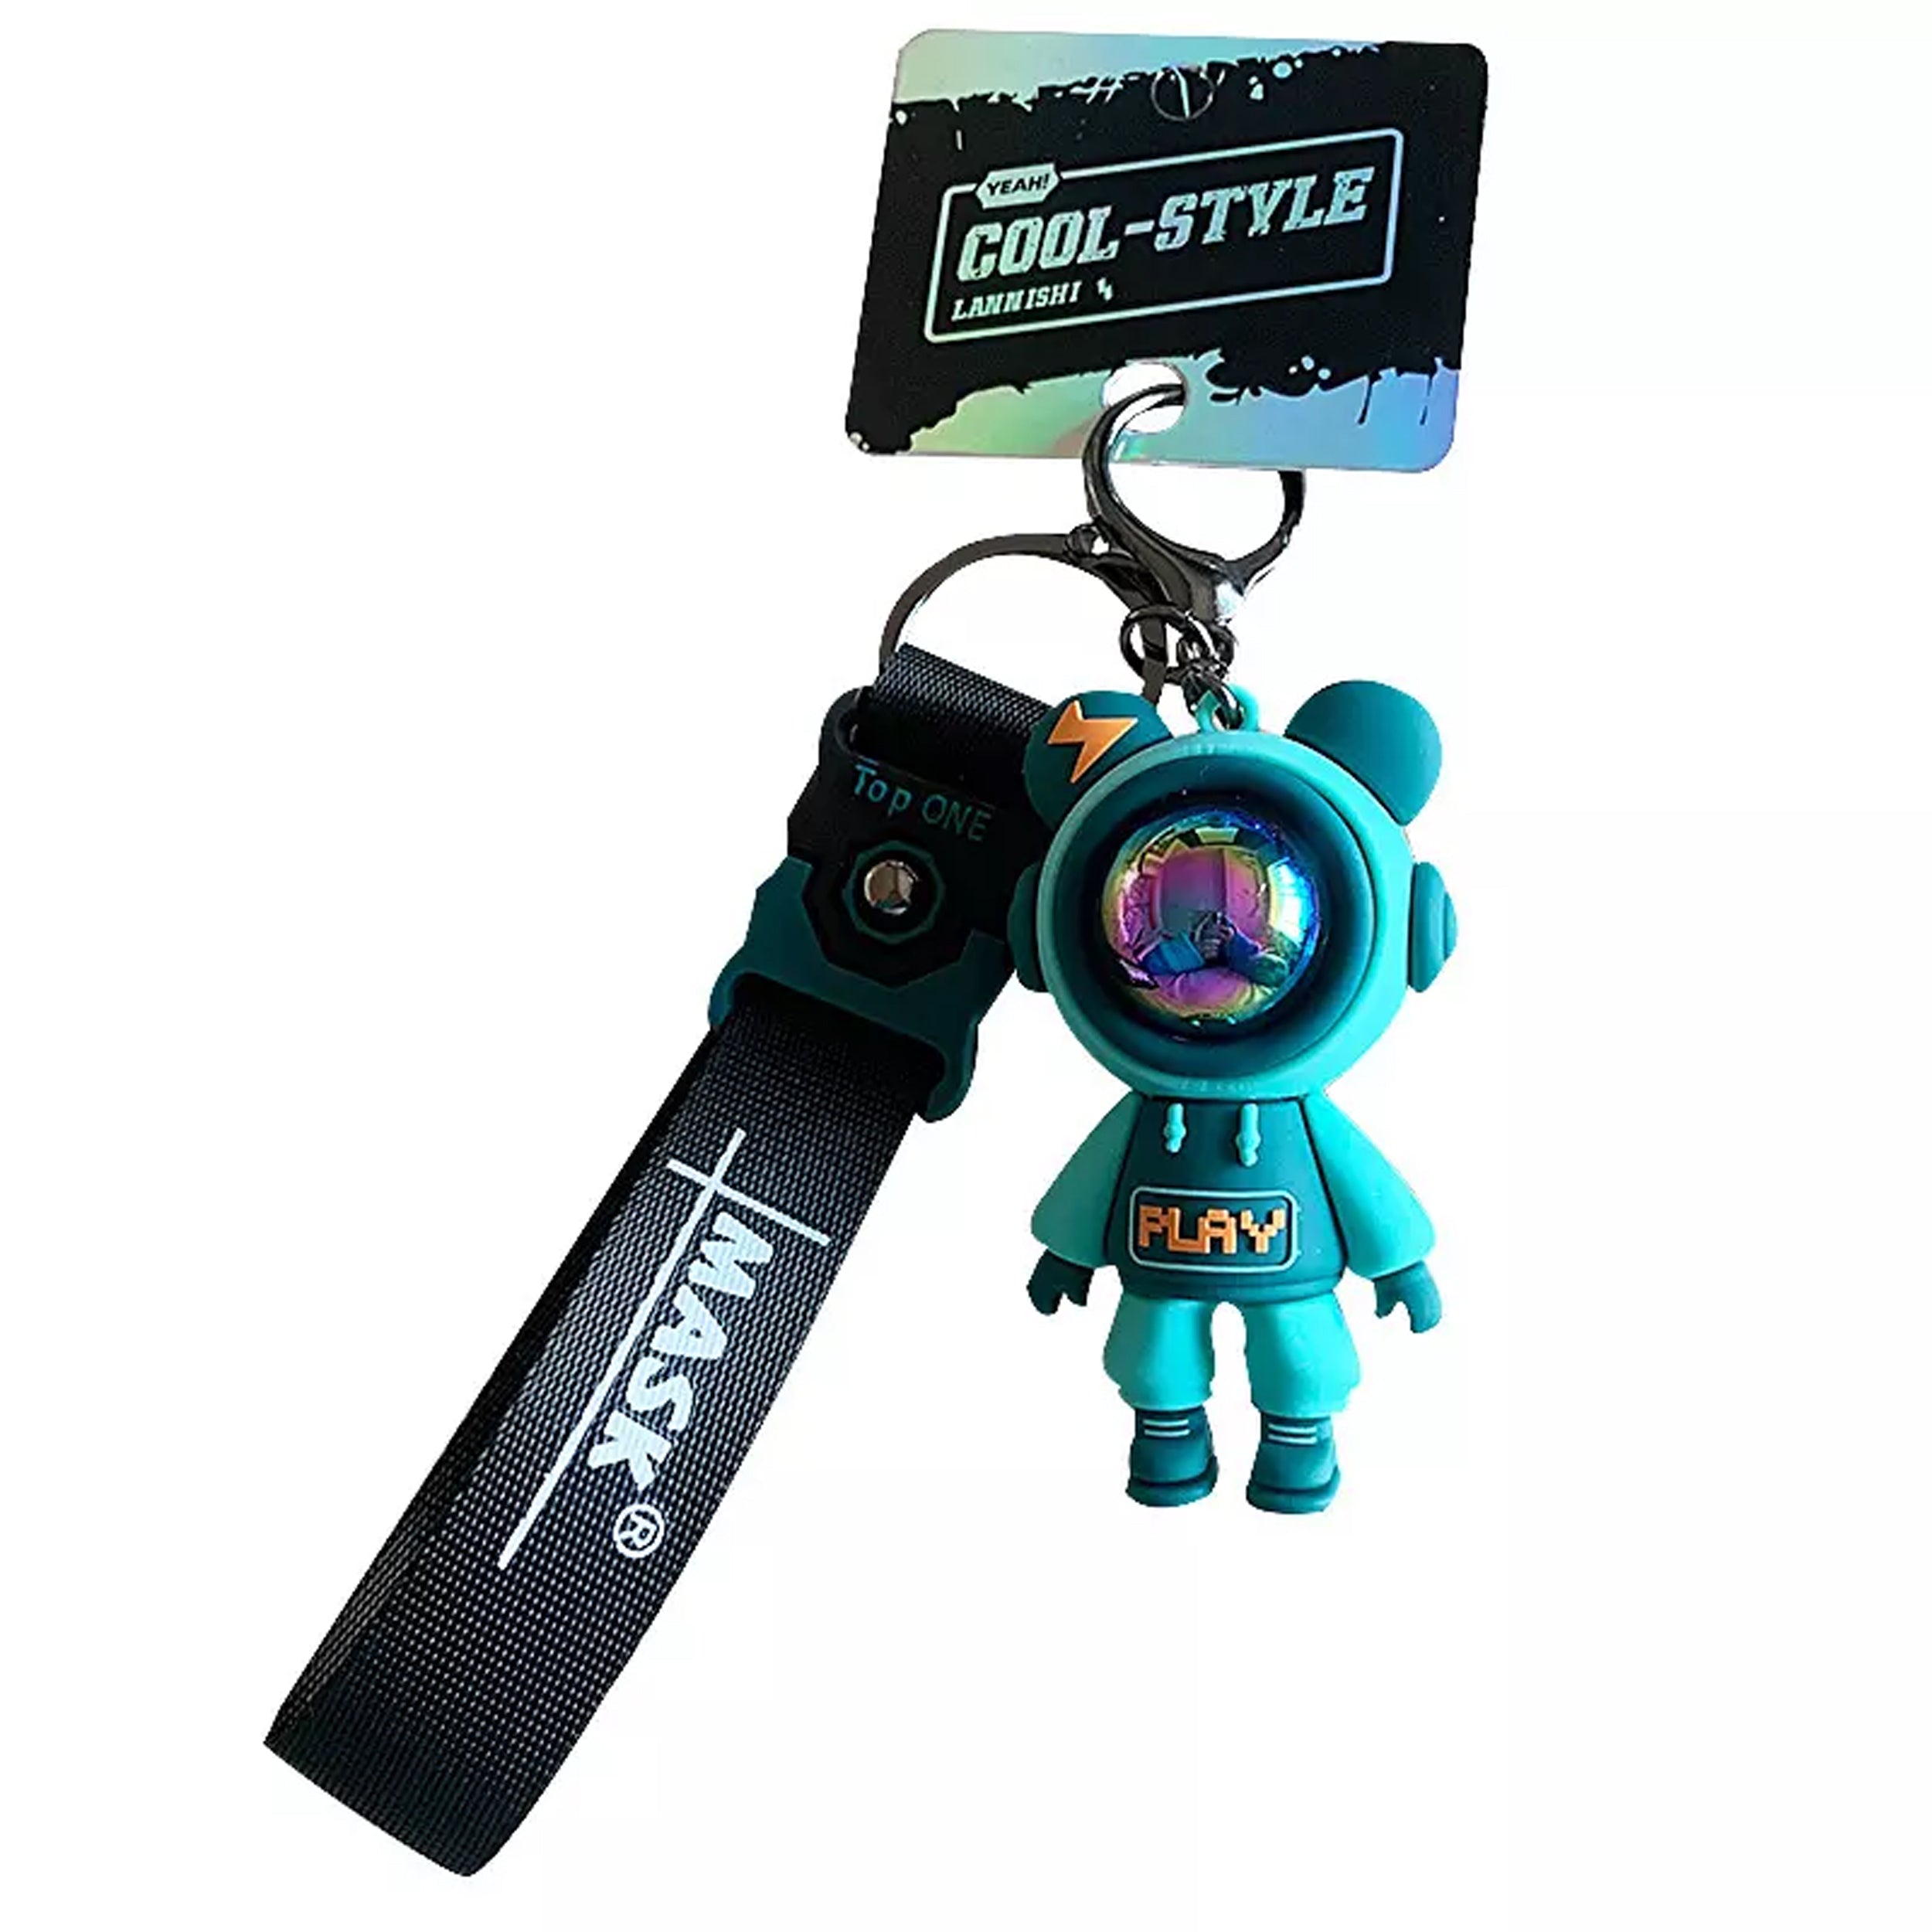 Space Man Keychain With Flap